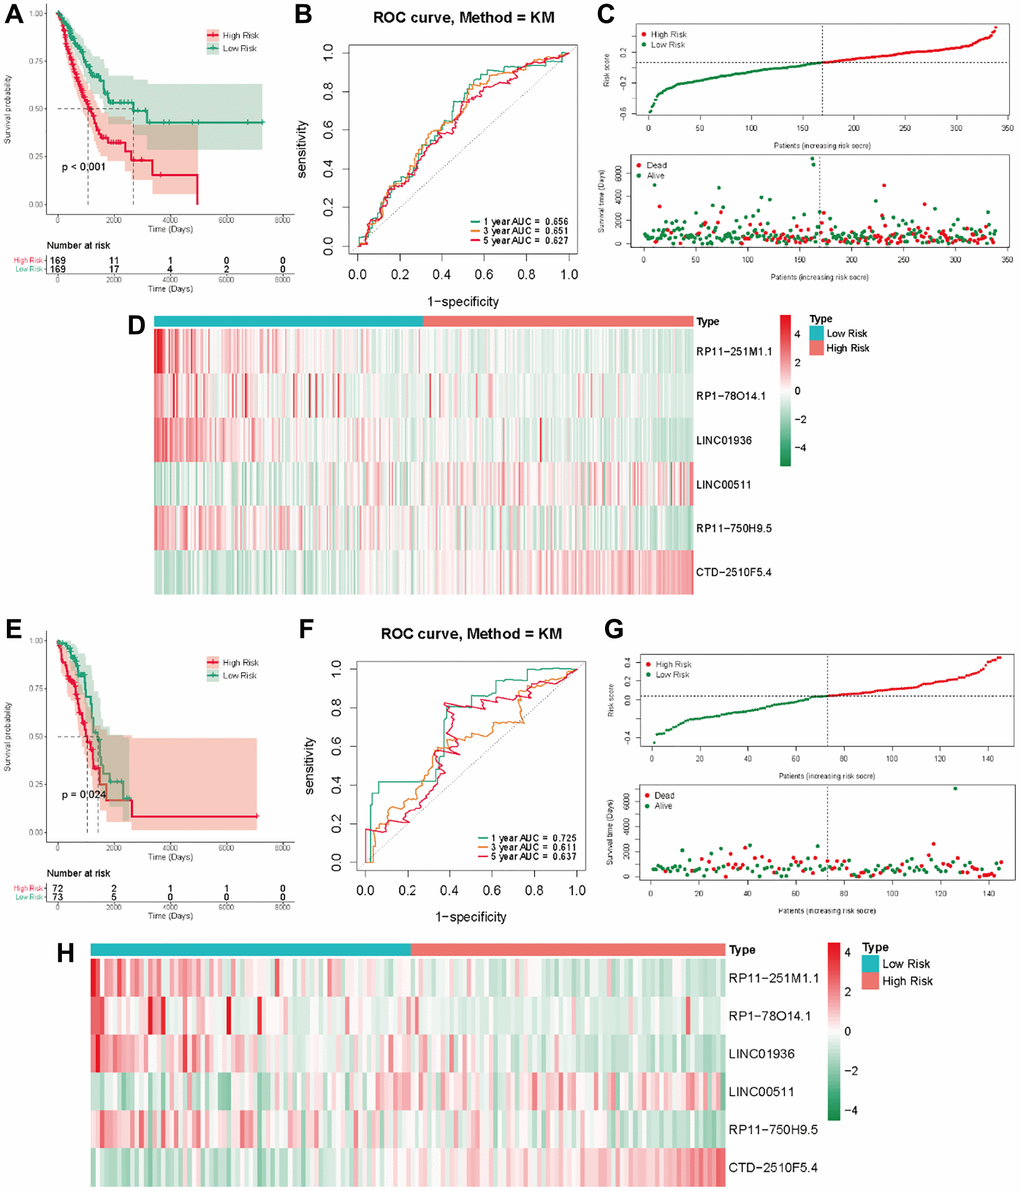 The methyltransferase-related IncRNAs signature was a prognostic biomarker for OS in the TCGA-LUAD cohort. (A) K-M survival of OS according to methyltransferase-related IncRNA signature groups in the training cohorts; (B) AUC of time-dependent ROC curve for the risk score in the training dataset; (C) The OS status and OS risk score plots in the training dataset; (D) The heat map of these 6 methyltransferase-related lncRNAs between the high- and low-risk groups in the training dataset; (E) K-M survival of OS according to methyltransferase-related IncRNA signature groups in the test cohorts; (F) AUC of time-dependent ROC curve for the risk score in the test dataset; (G) The OS status and OS risk score plots in the test dataset; (H) The heat map of these 6 methyltransferase-related lncRNAs between the high- and low-risk groups in the test dataset.